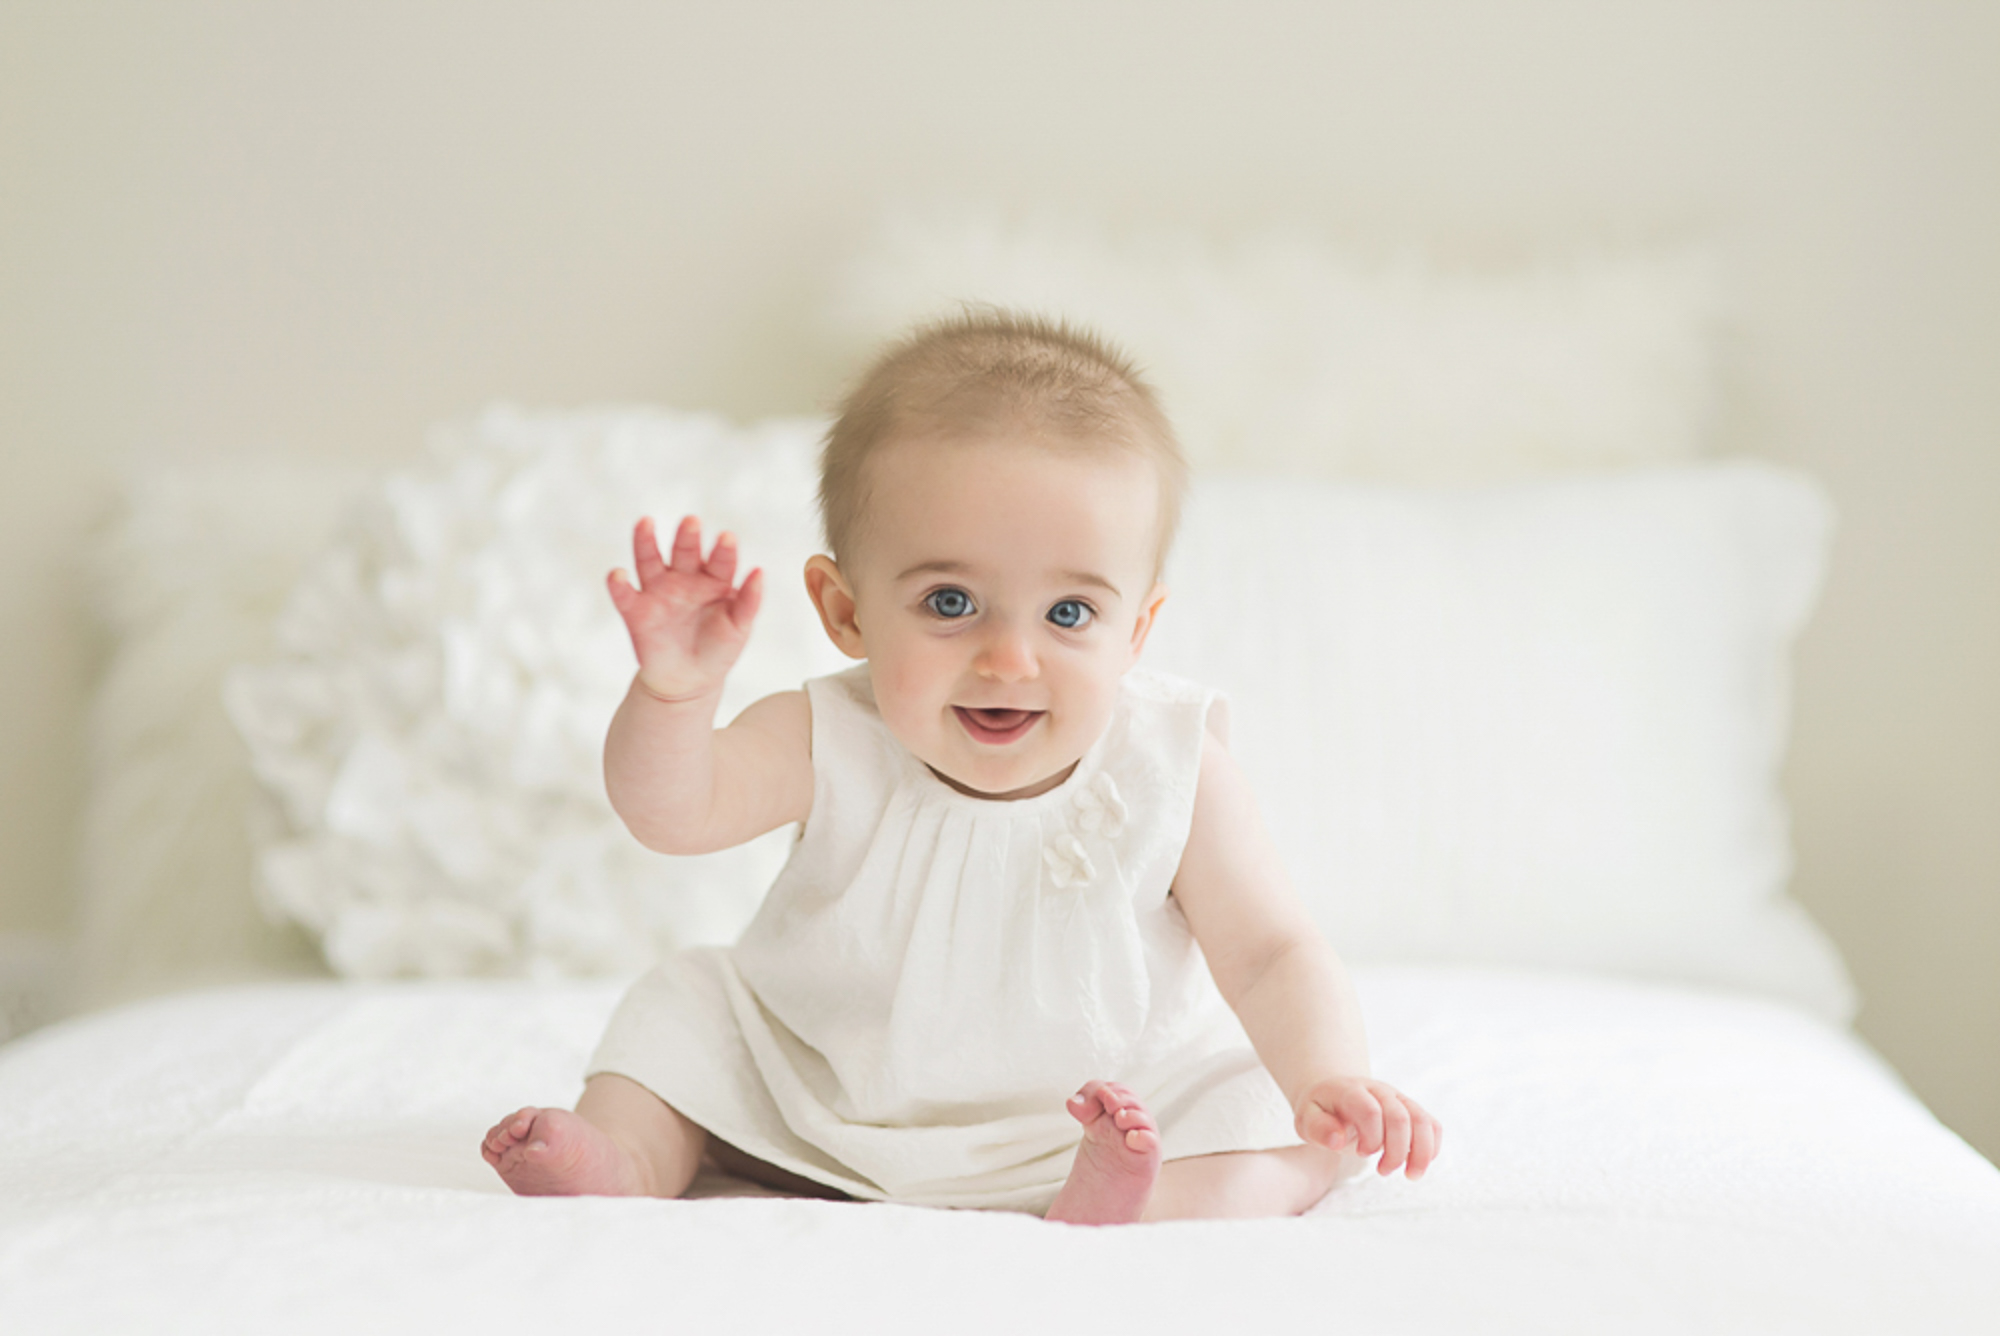 Simple Baby Photography | Anna Wisjo Photography